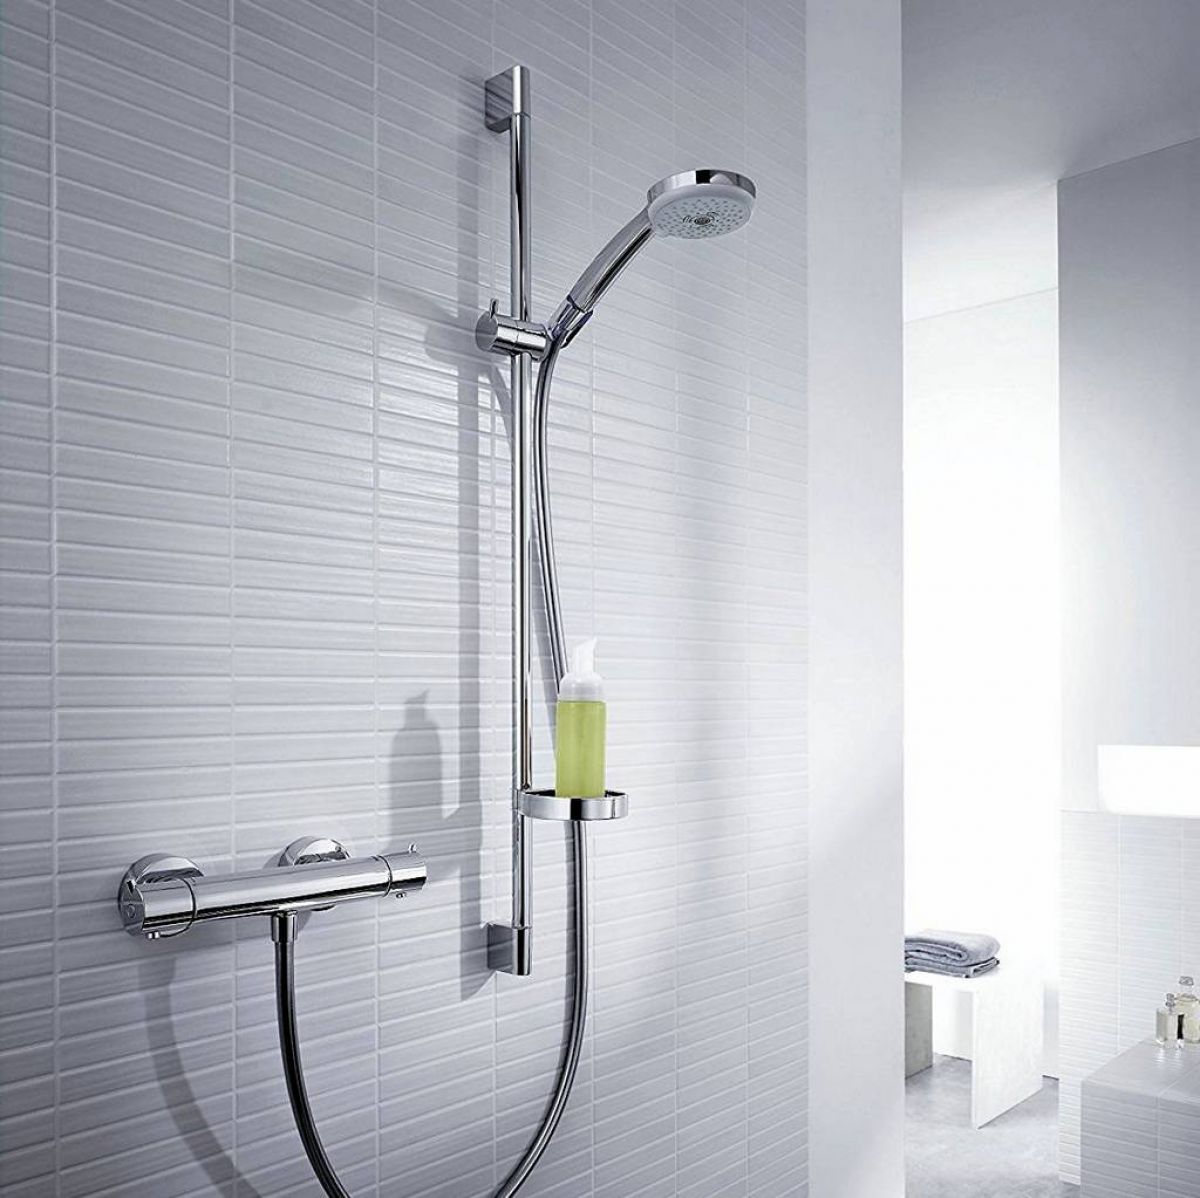 Ecostat 1001 SL 27086000 Shower Combination Chrome-Plated with 65 cm Unica C Shower Pole Hansgrohe Croma 100 Multi 